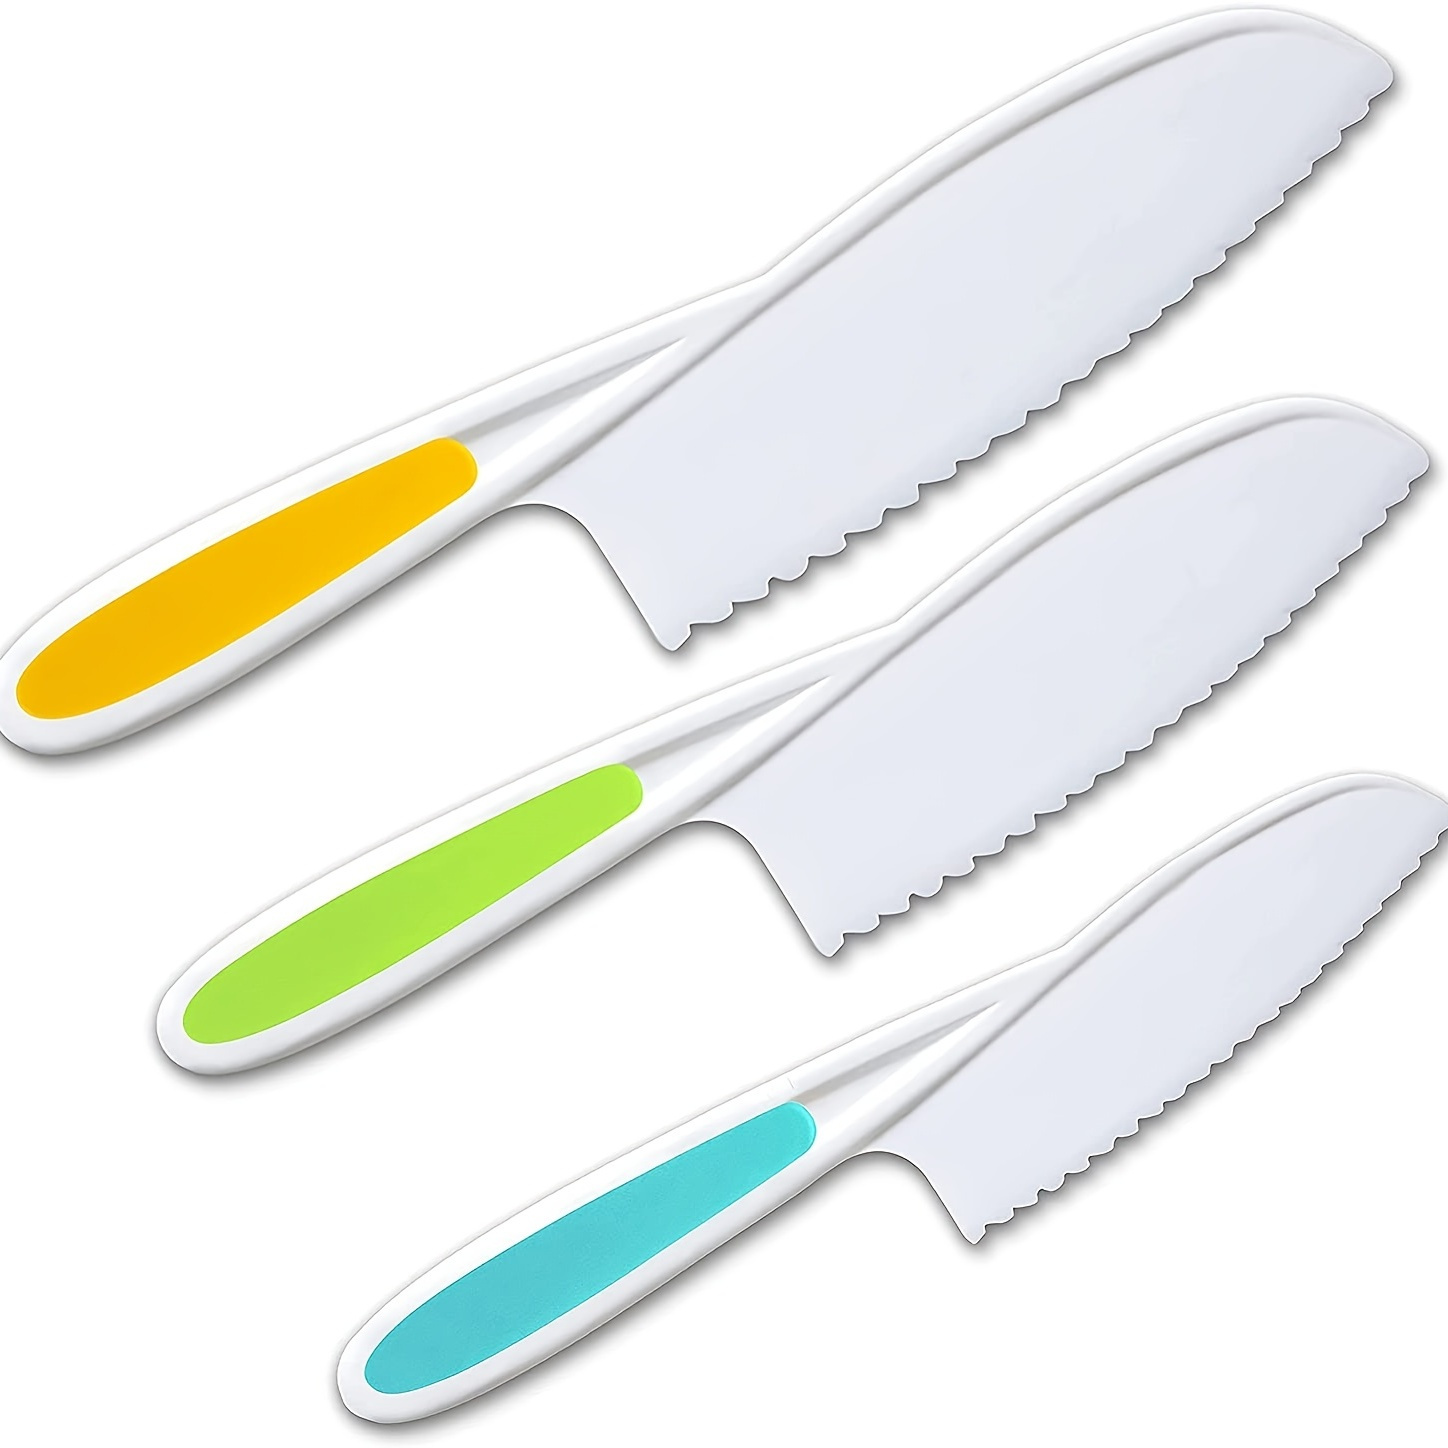 Joie Crinkle Cutter Kitchen Knife for Vegetables, Stainless Steel Blade,  Colors May Vary